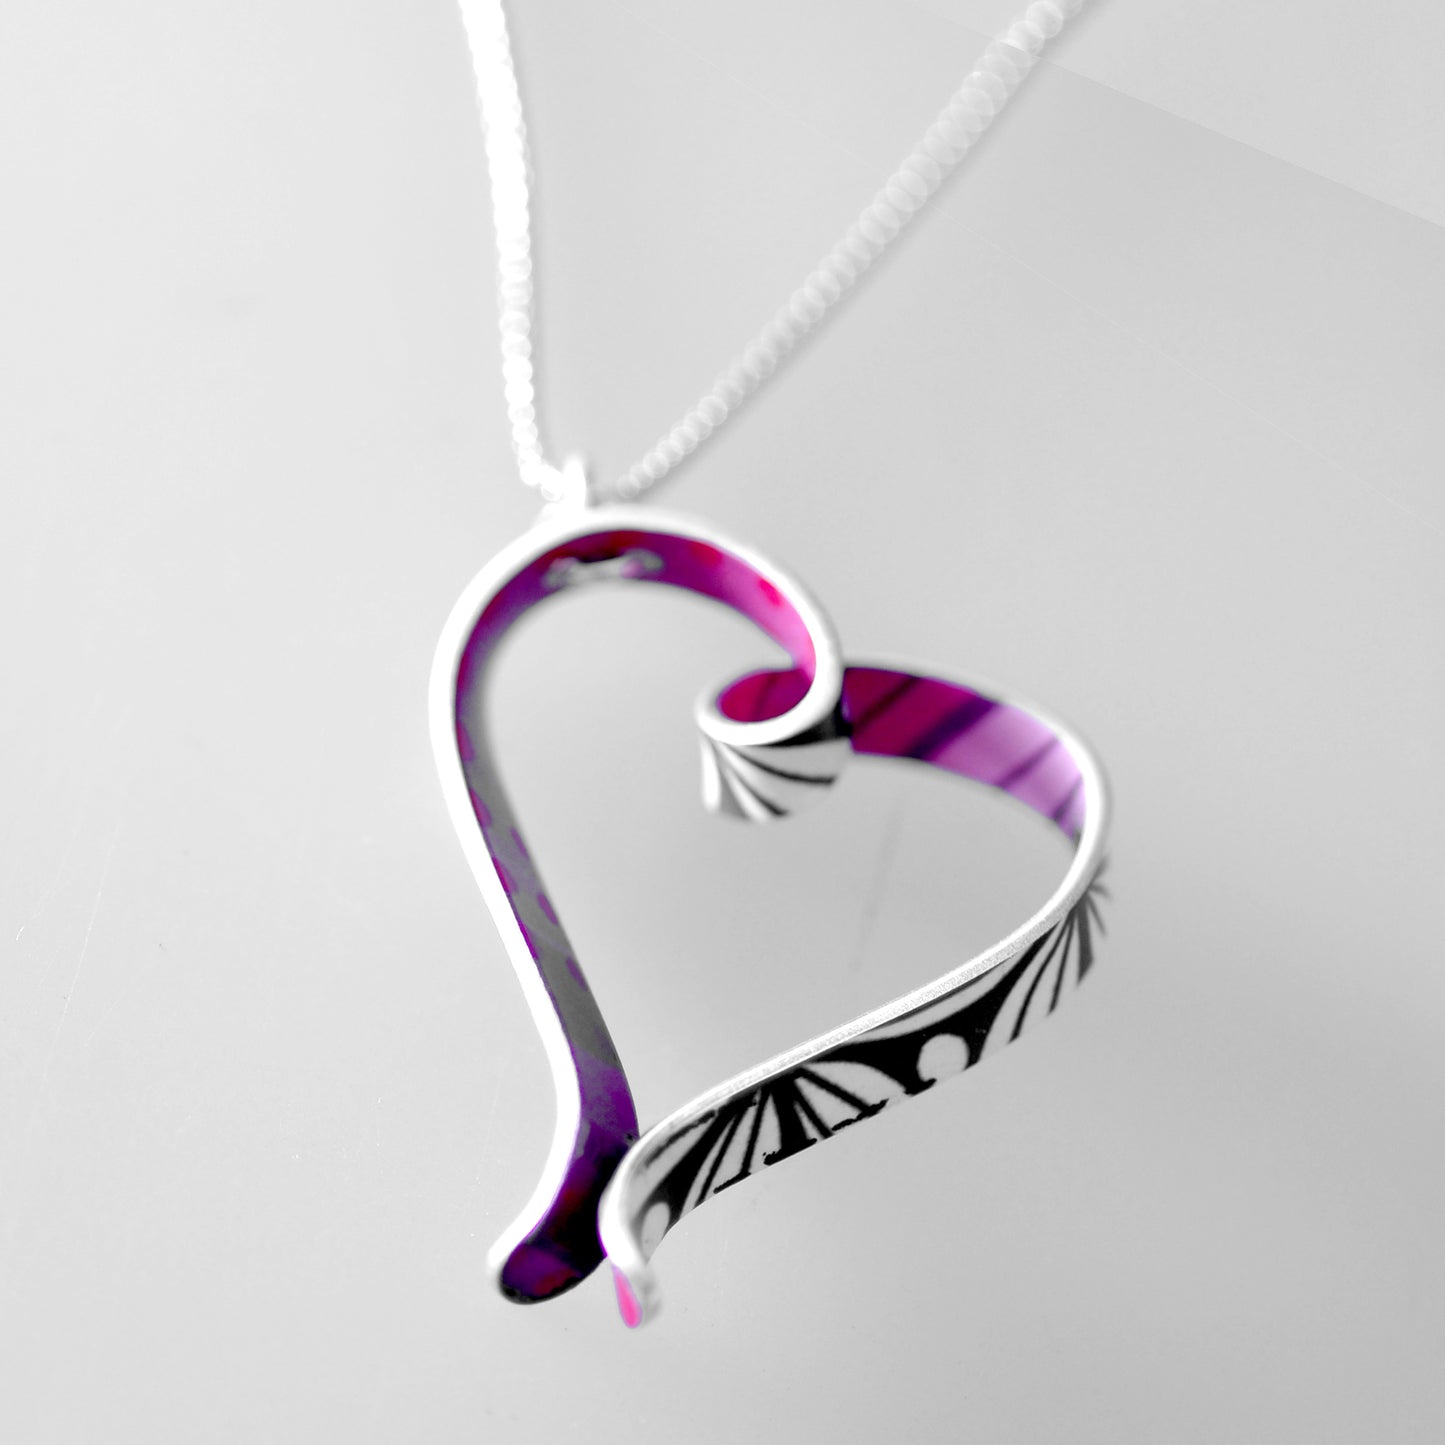 Heart Necklace - Red, Black & White